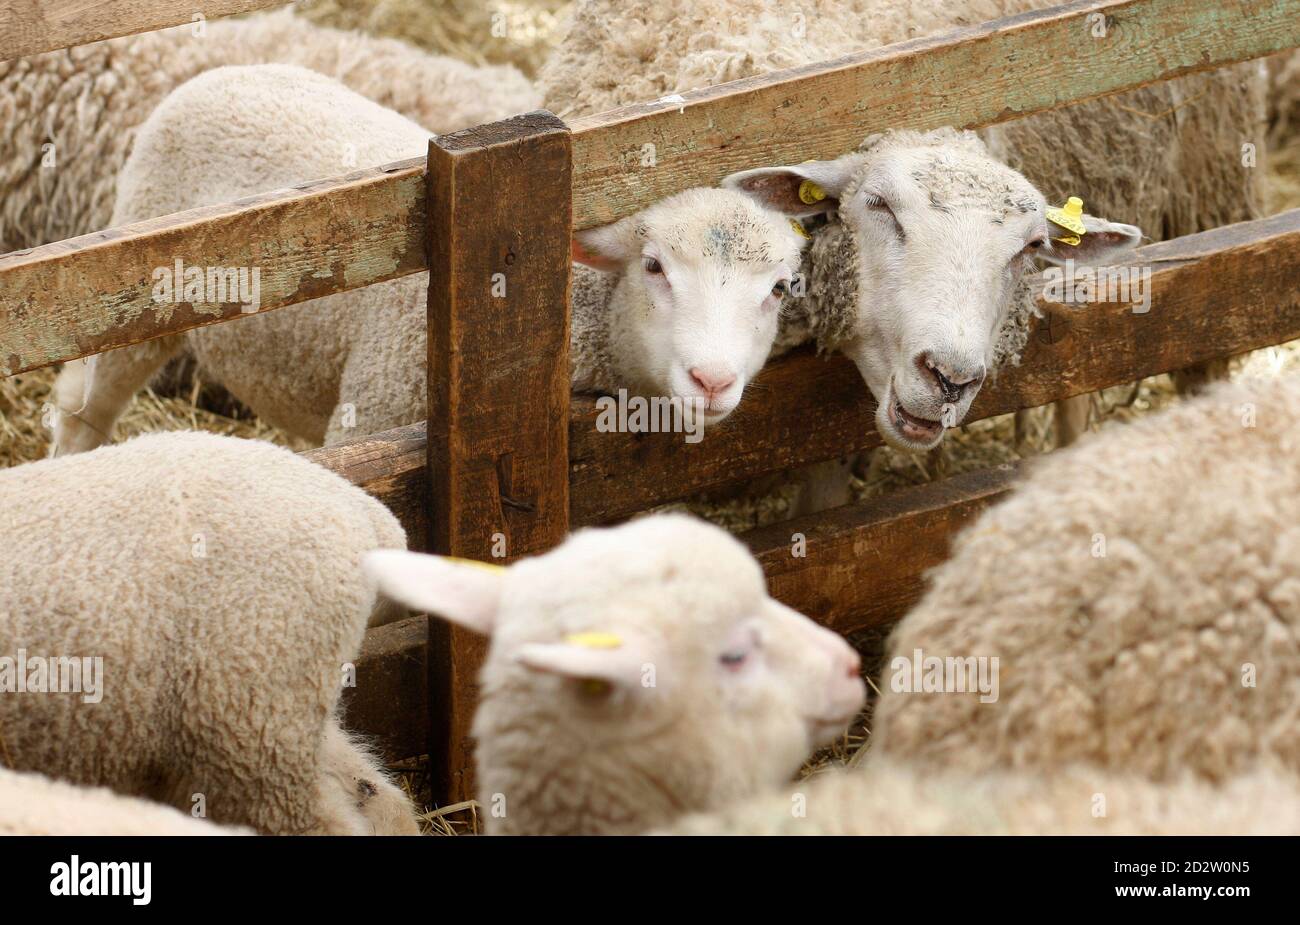 A Charlevoix lamb and a sheep look through a fence at the Ferme  Eboulmontaise in Les Eboulements, Charlevoix May 13, 2009. The Charlevoix  lamb was awarded, by Quebec's Department of Agriculture and